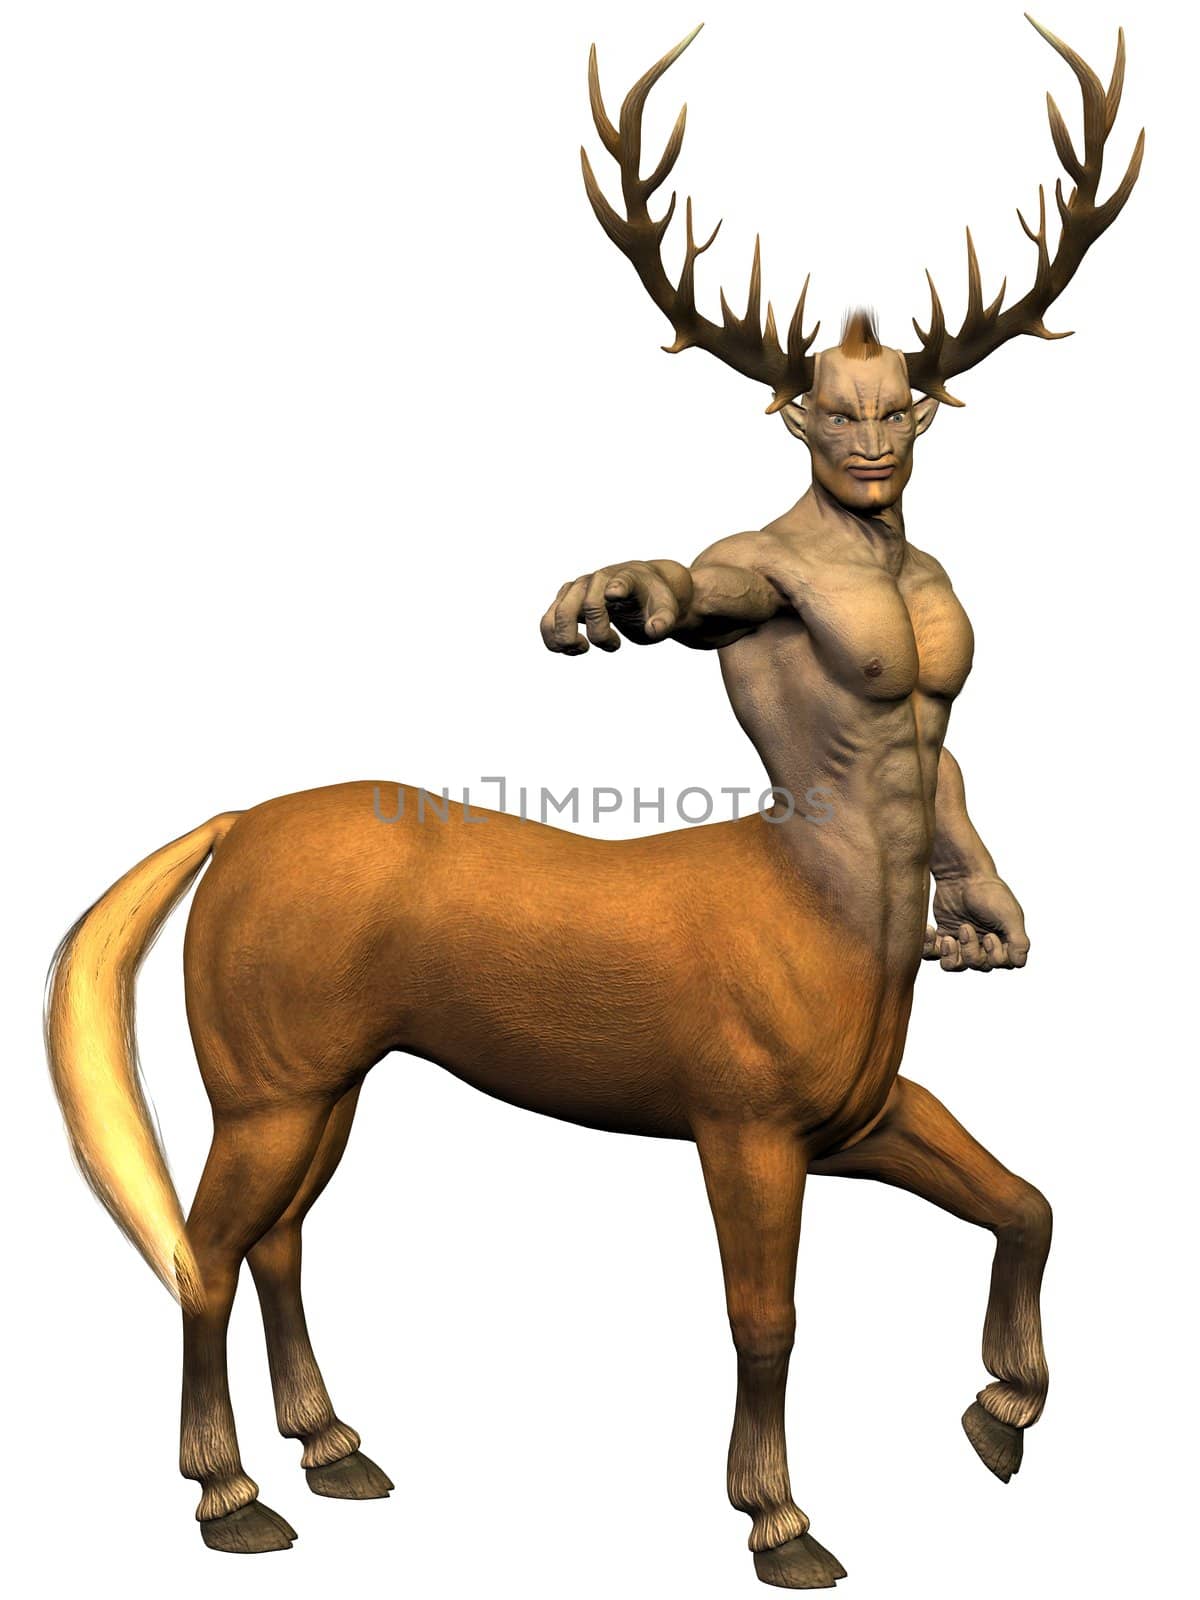 3D rendered image of centaur on white background isolated